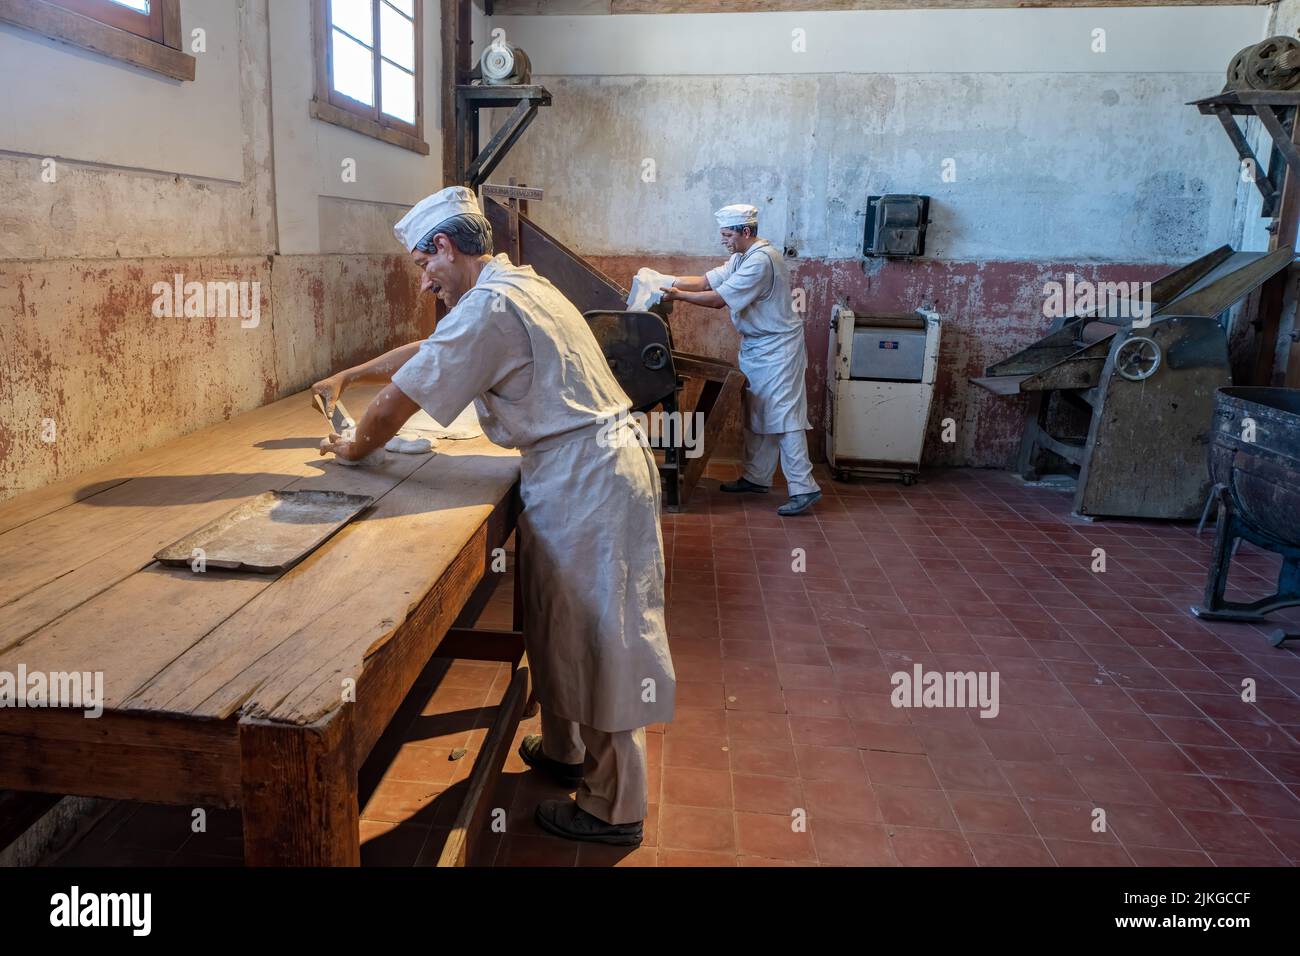 A display of the company store in the former saltpeter company town of Humberstone, Chile.  Now a ghost town & museum.  Bakers kneading bread dough sh Stock Photo